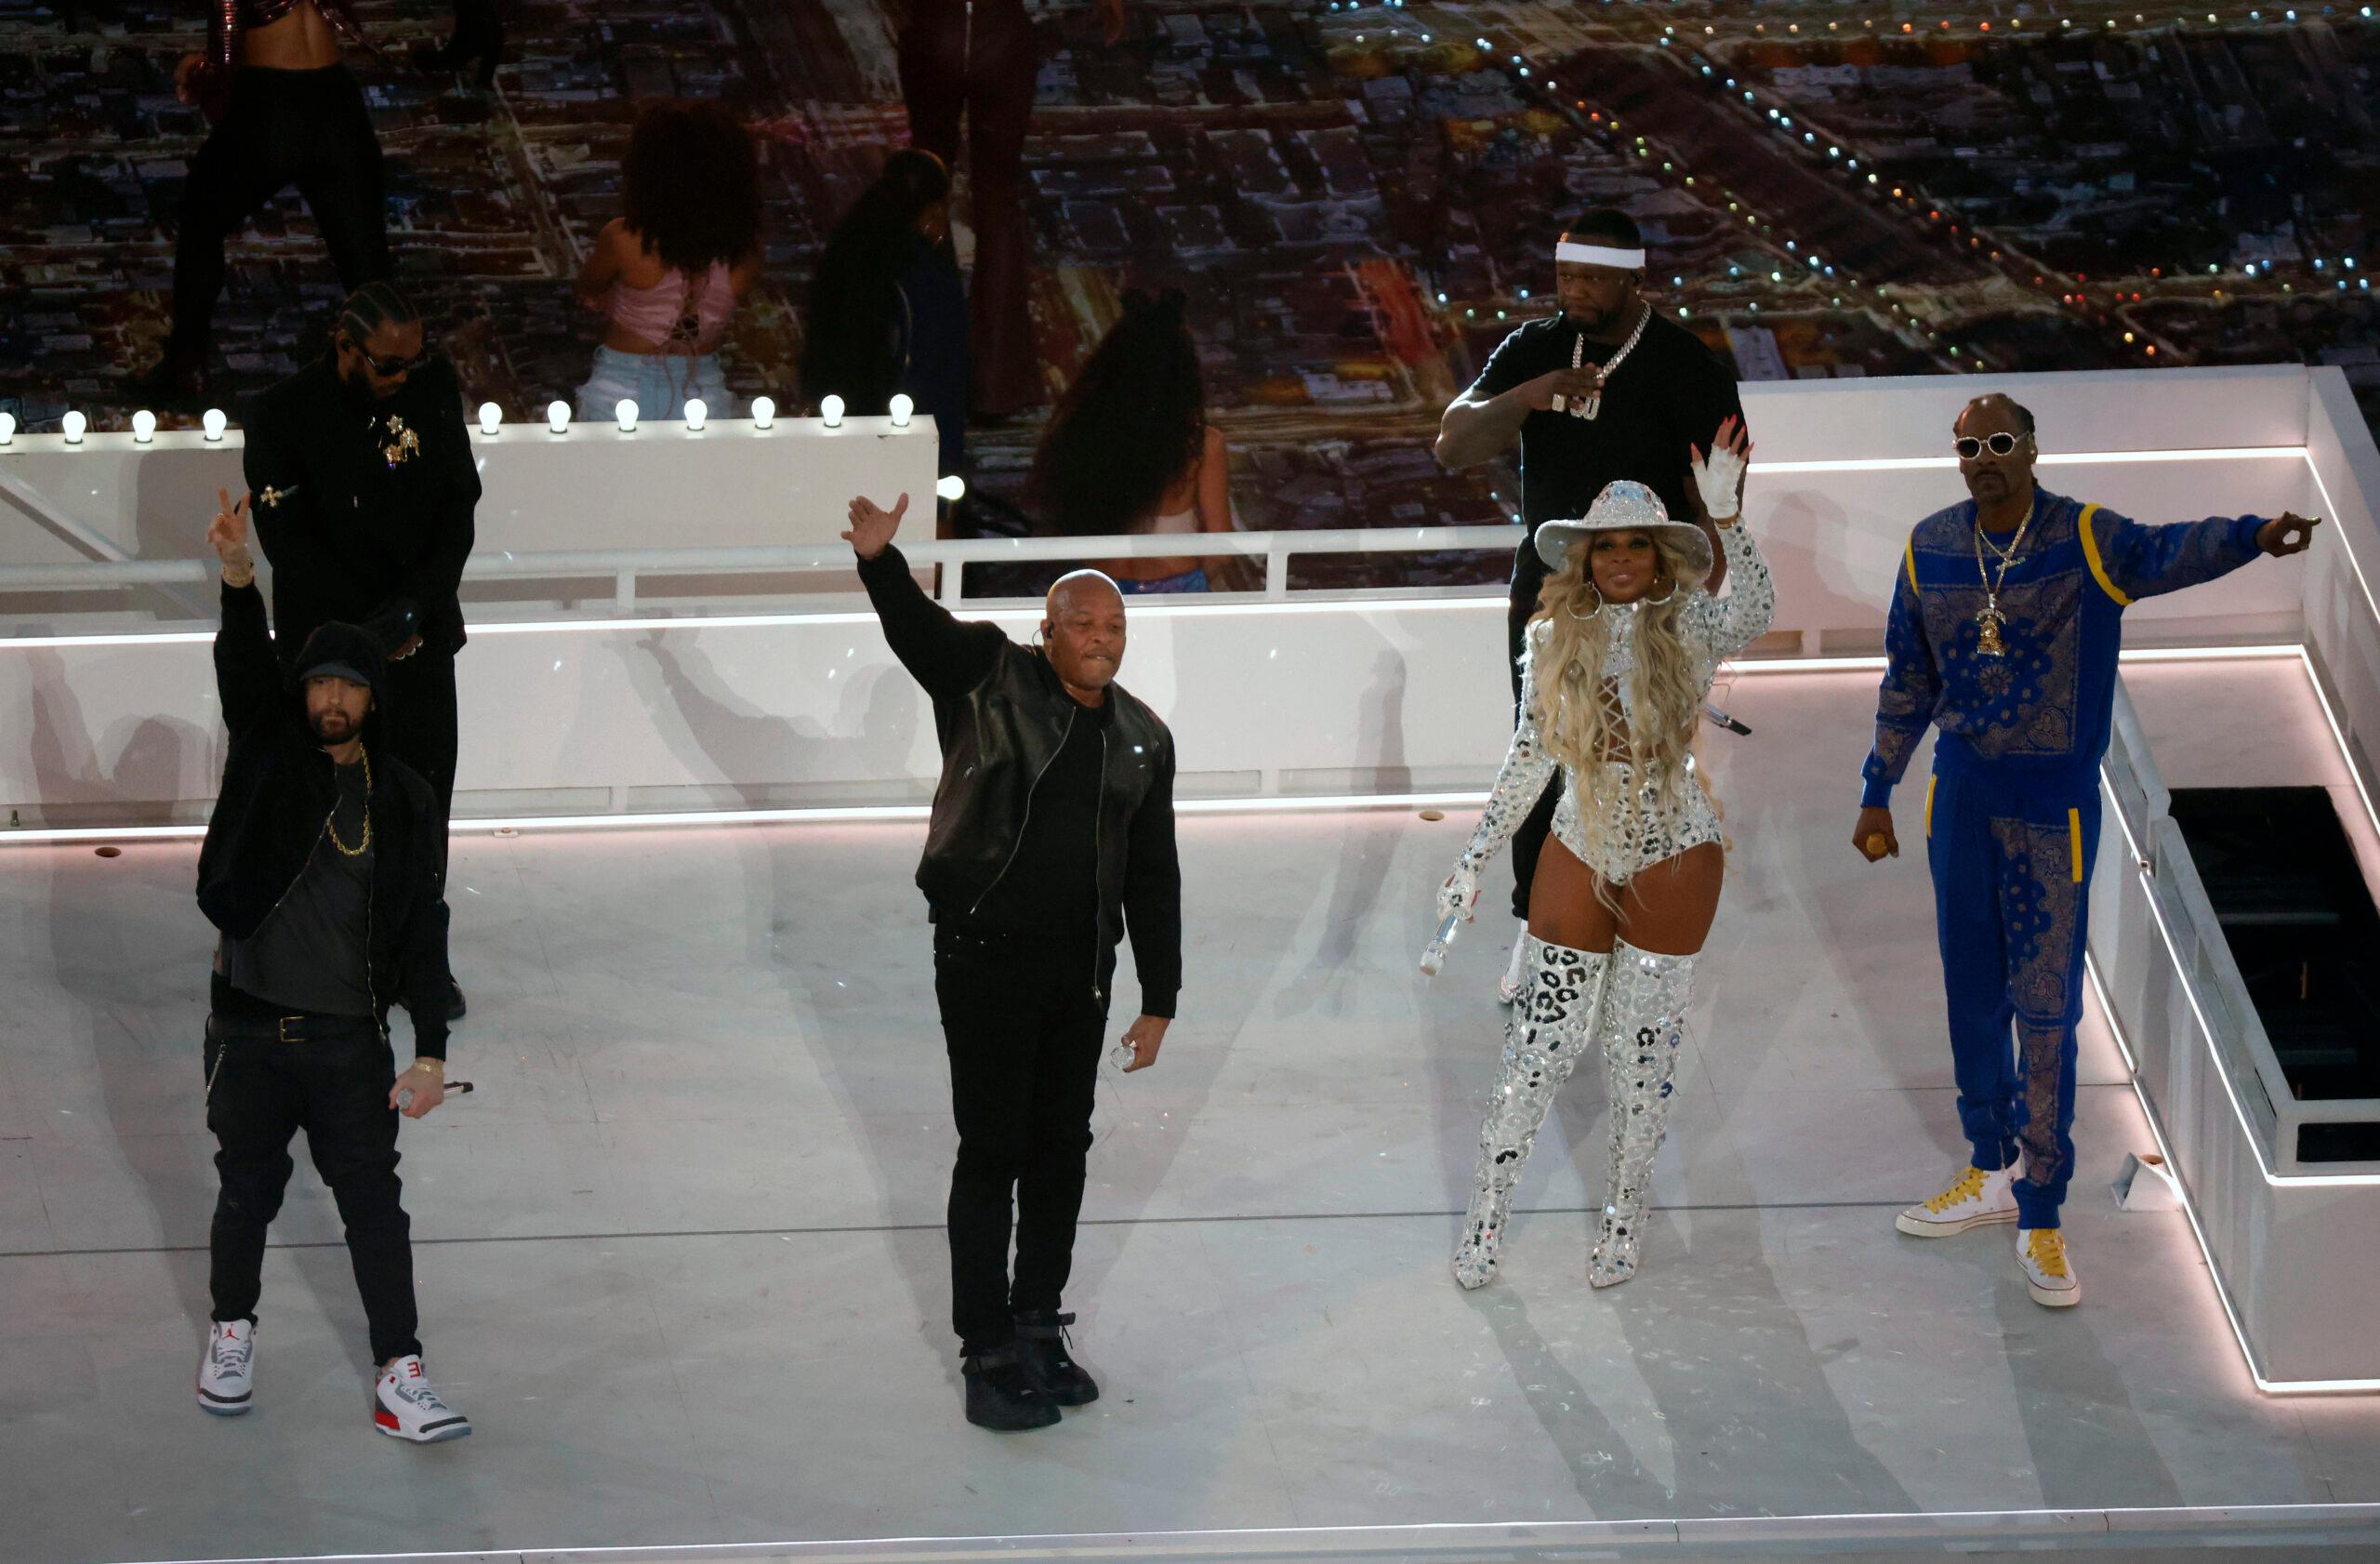 Dr. Dre, Kendrick Lamar, Eminem, Snoop Dogg and Mary J. Blige perform at the halftime show 